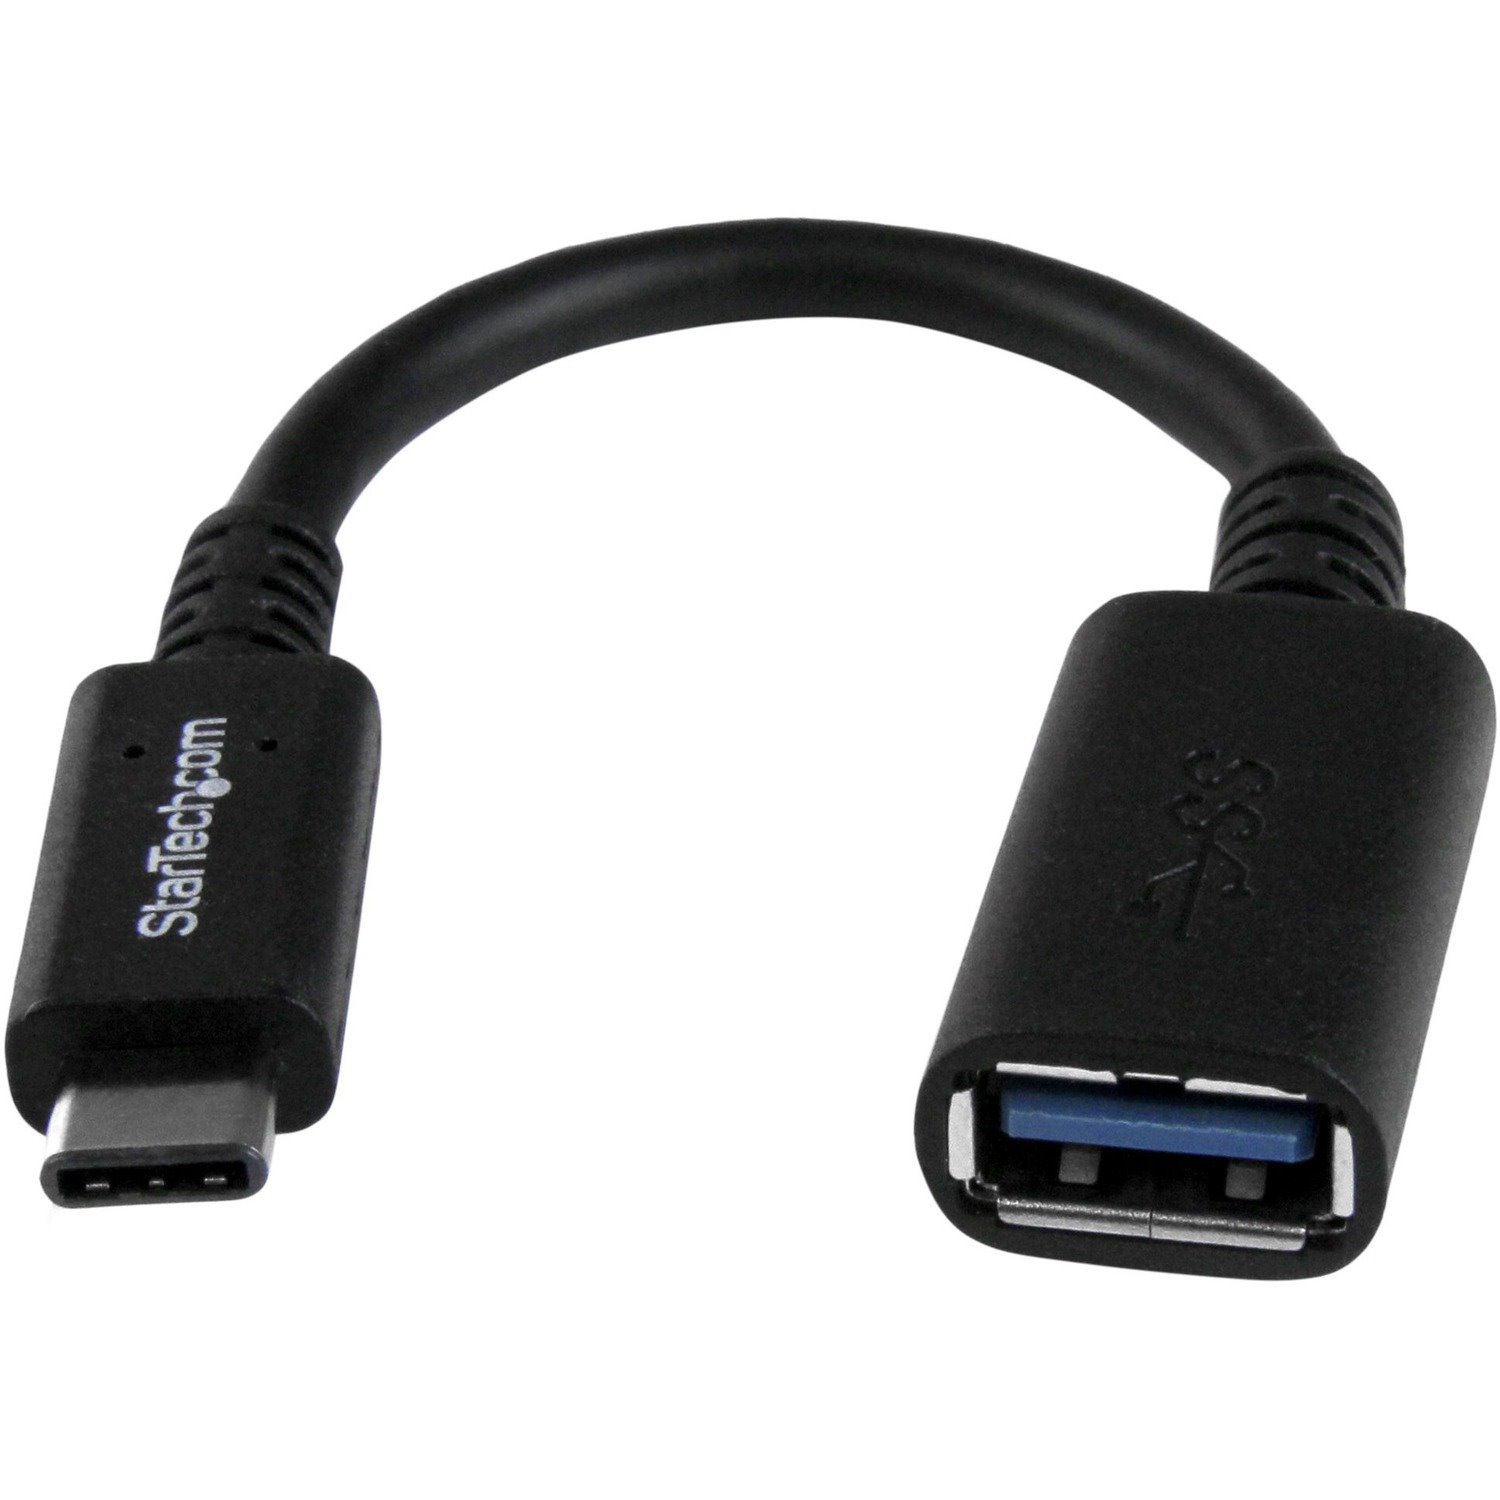 StarTech.com USB-C to USB Adapter ? 6in ? USB-IF Certified ? USB-C to USB-A ? USB 3.1 Gen 1 ? USB C Adapter ? USB Type C